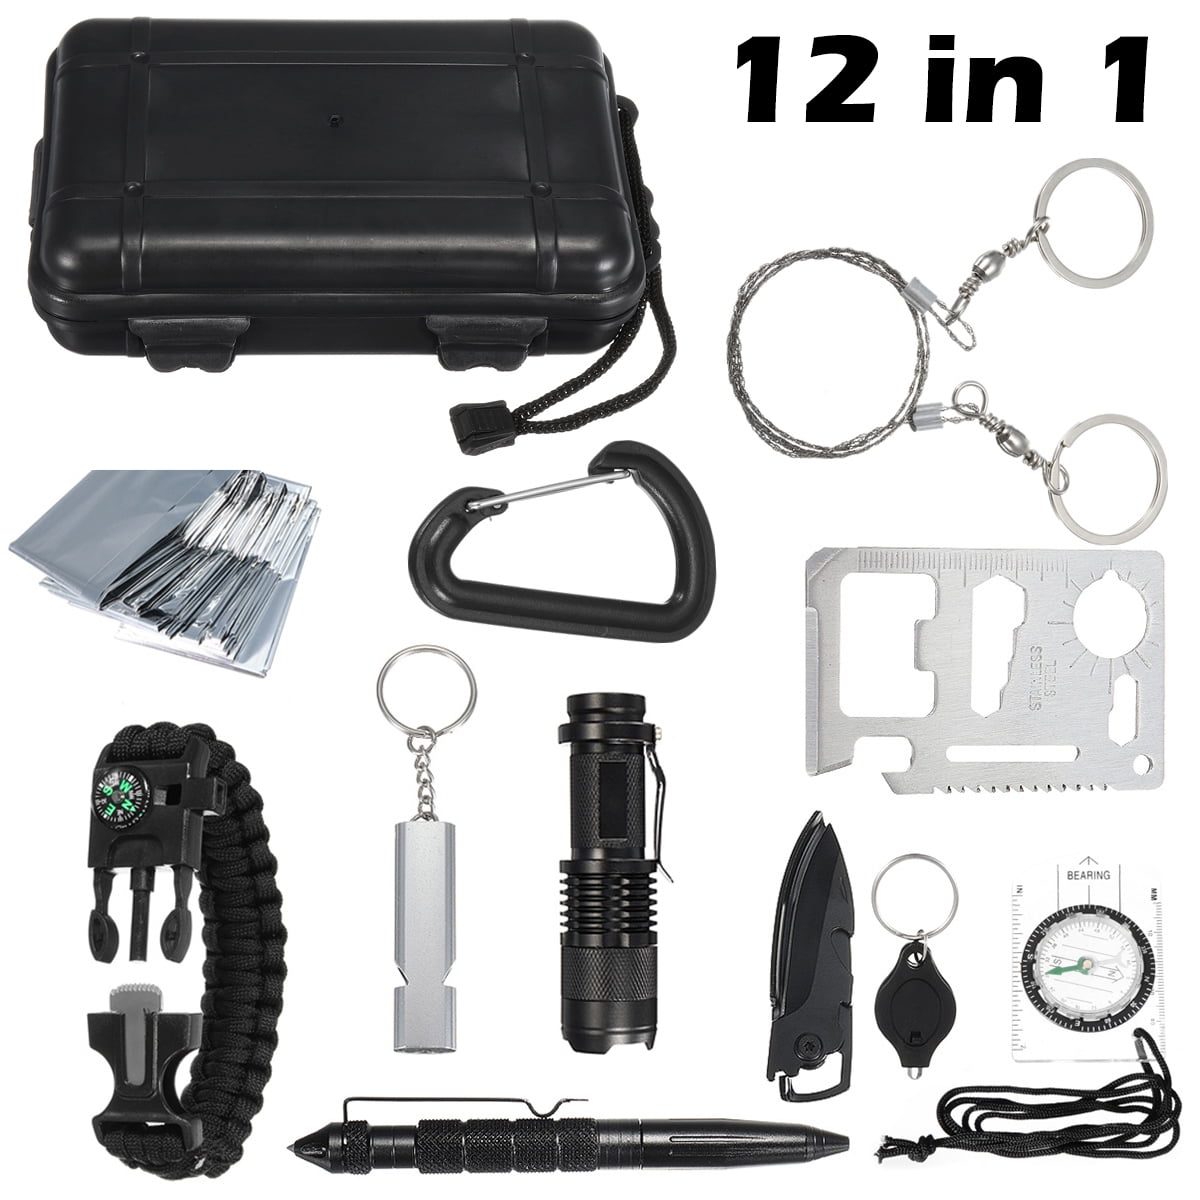 12 in 1 SOS Emergency Camping Survival Equipment Kit Outdoor Tactical Gear Tool 